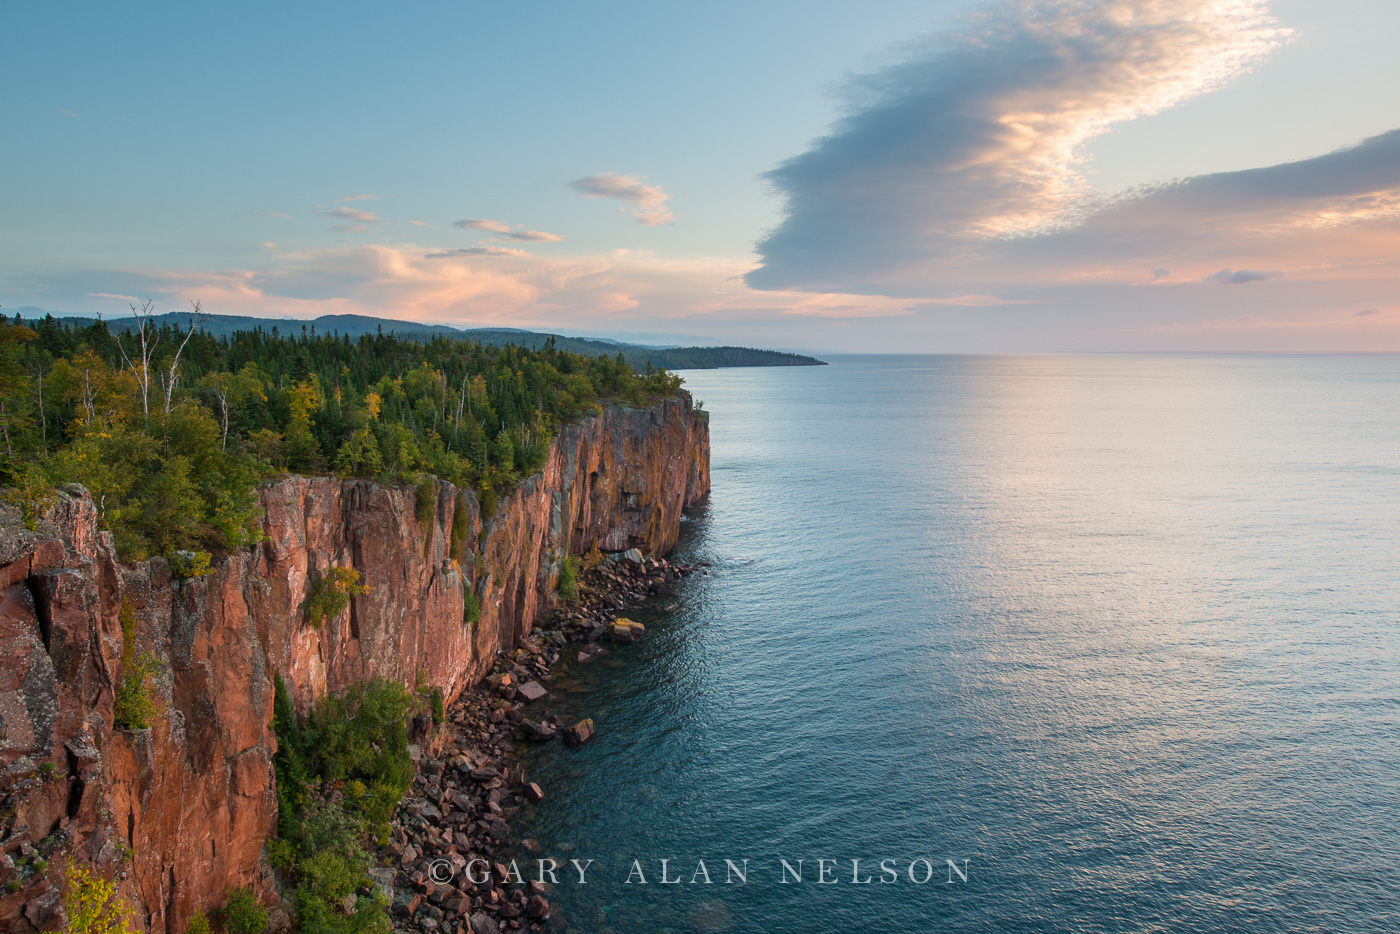 Daybreak over Lake Superior and Palisade Head, Tettegouche State Park, Minnesota